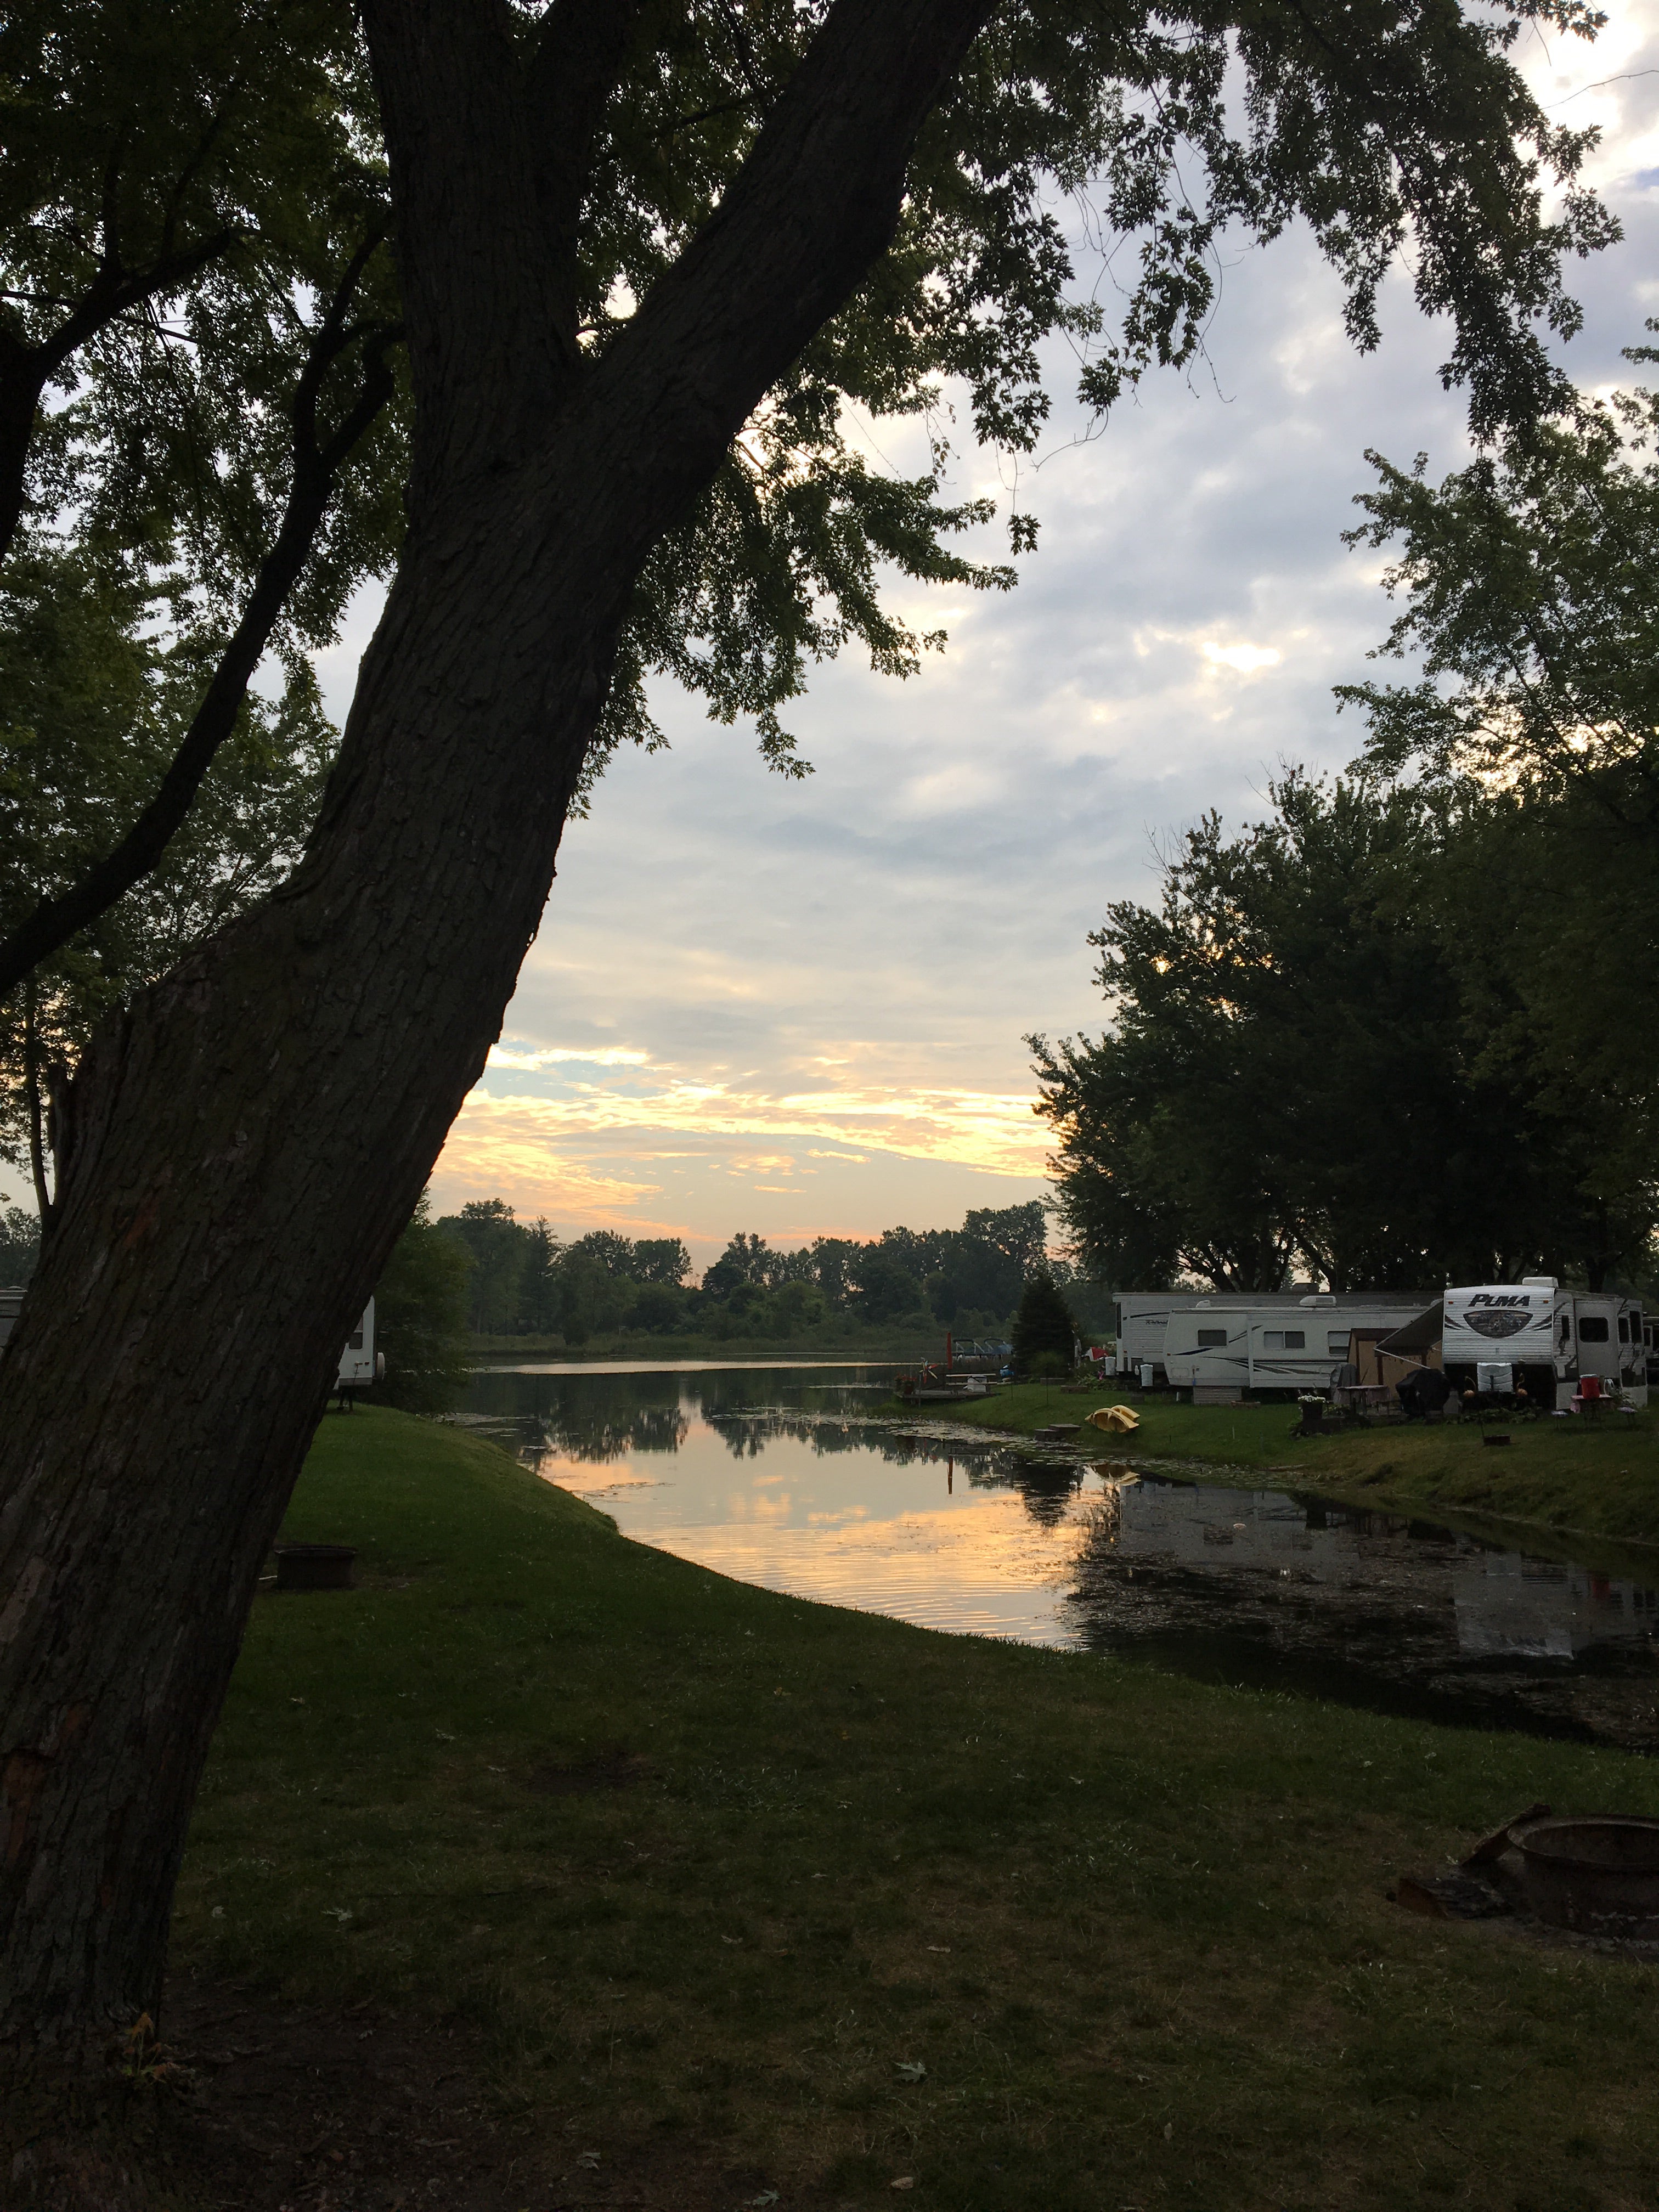 Camper submitted image from Yogi Bear's Jellystone Park at Barton Lake - 3